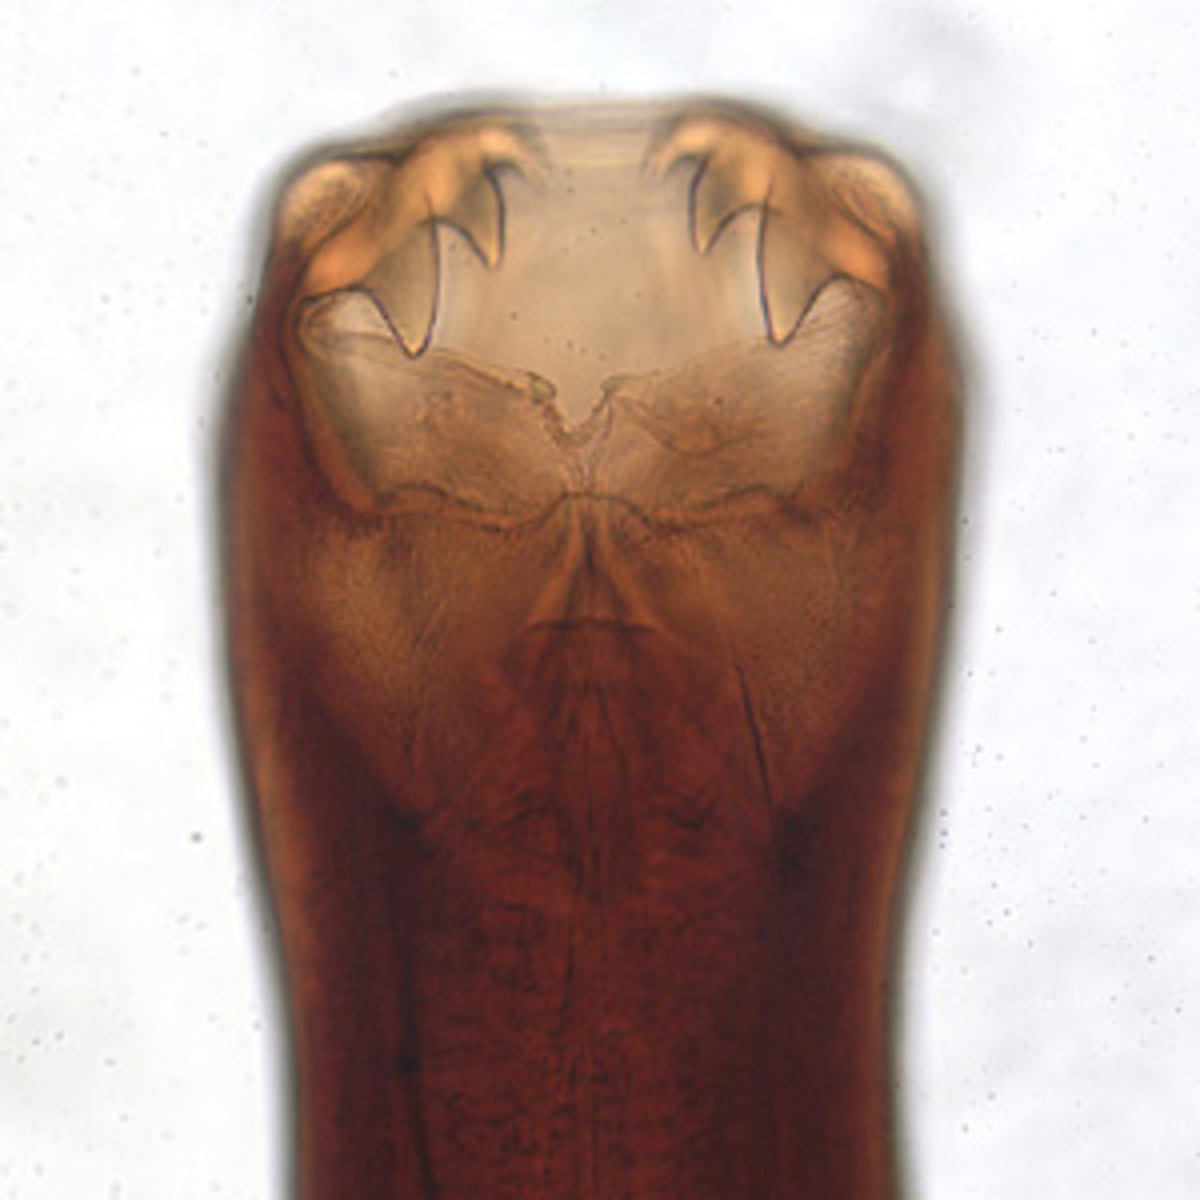 The cause of hookworm disease in warmer parts of the world. Check out those teeth! (Ancylostoma caninum).